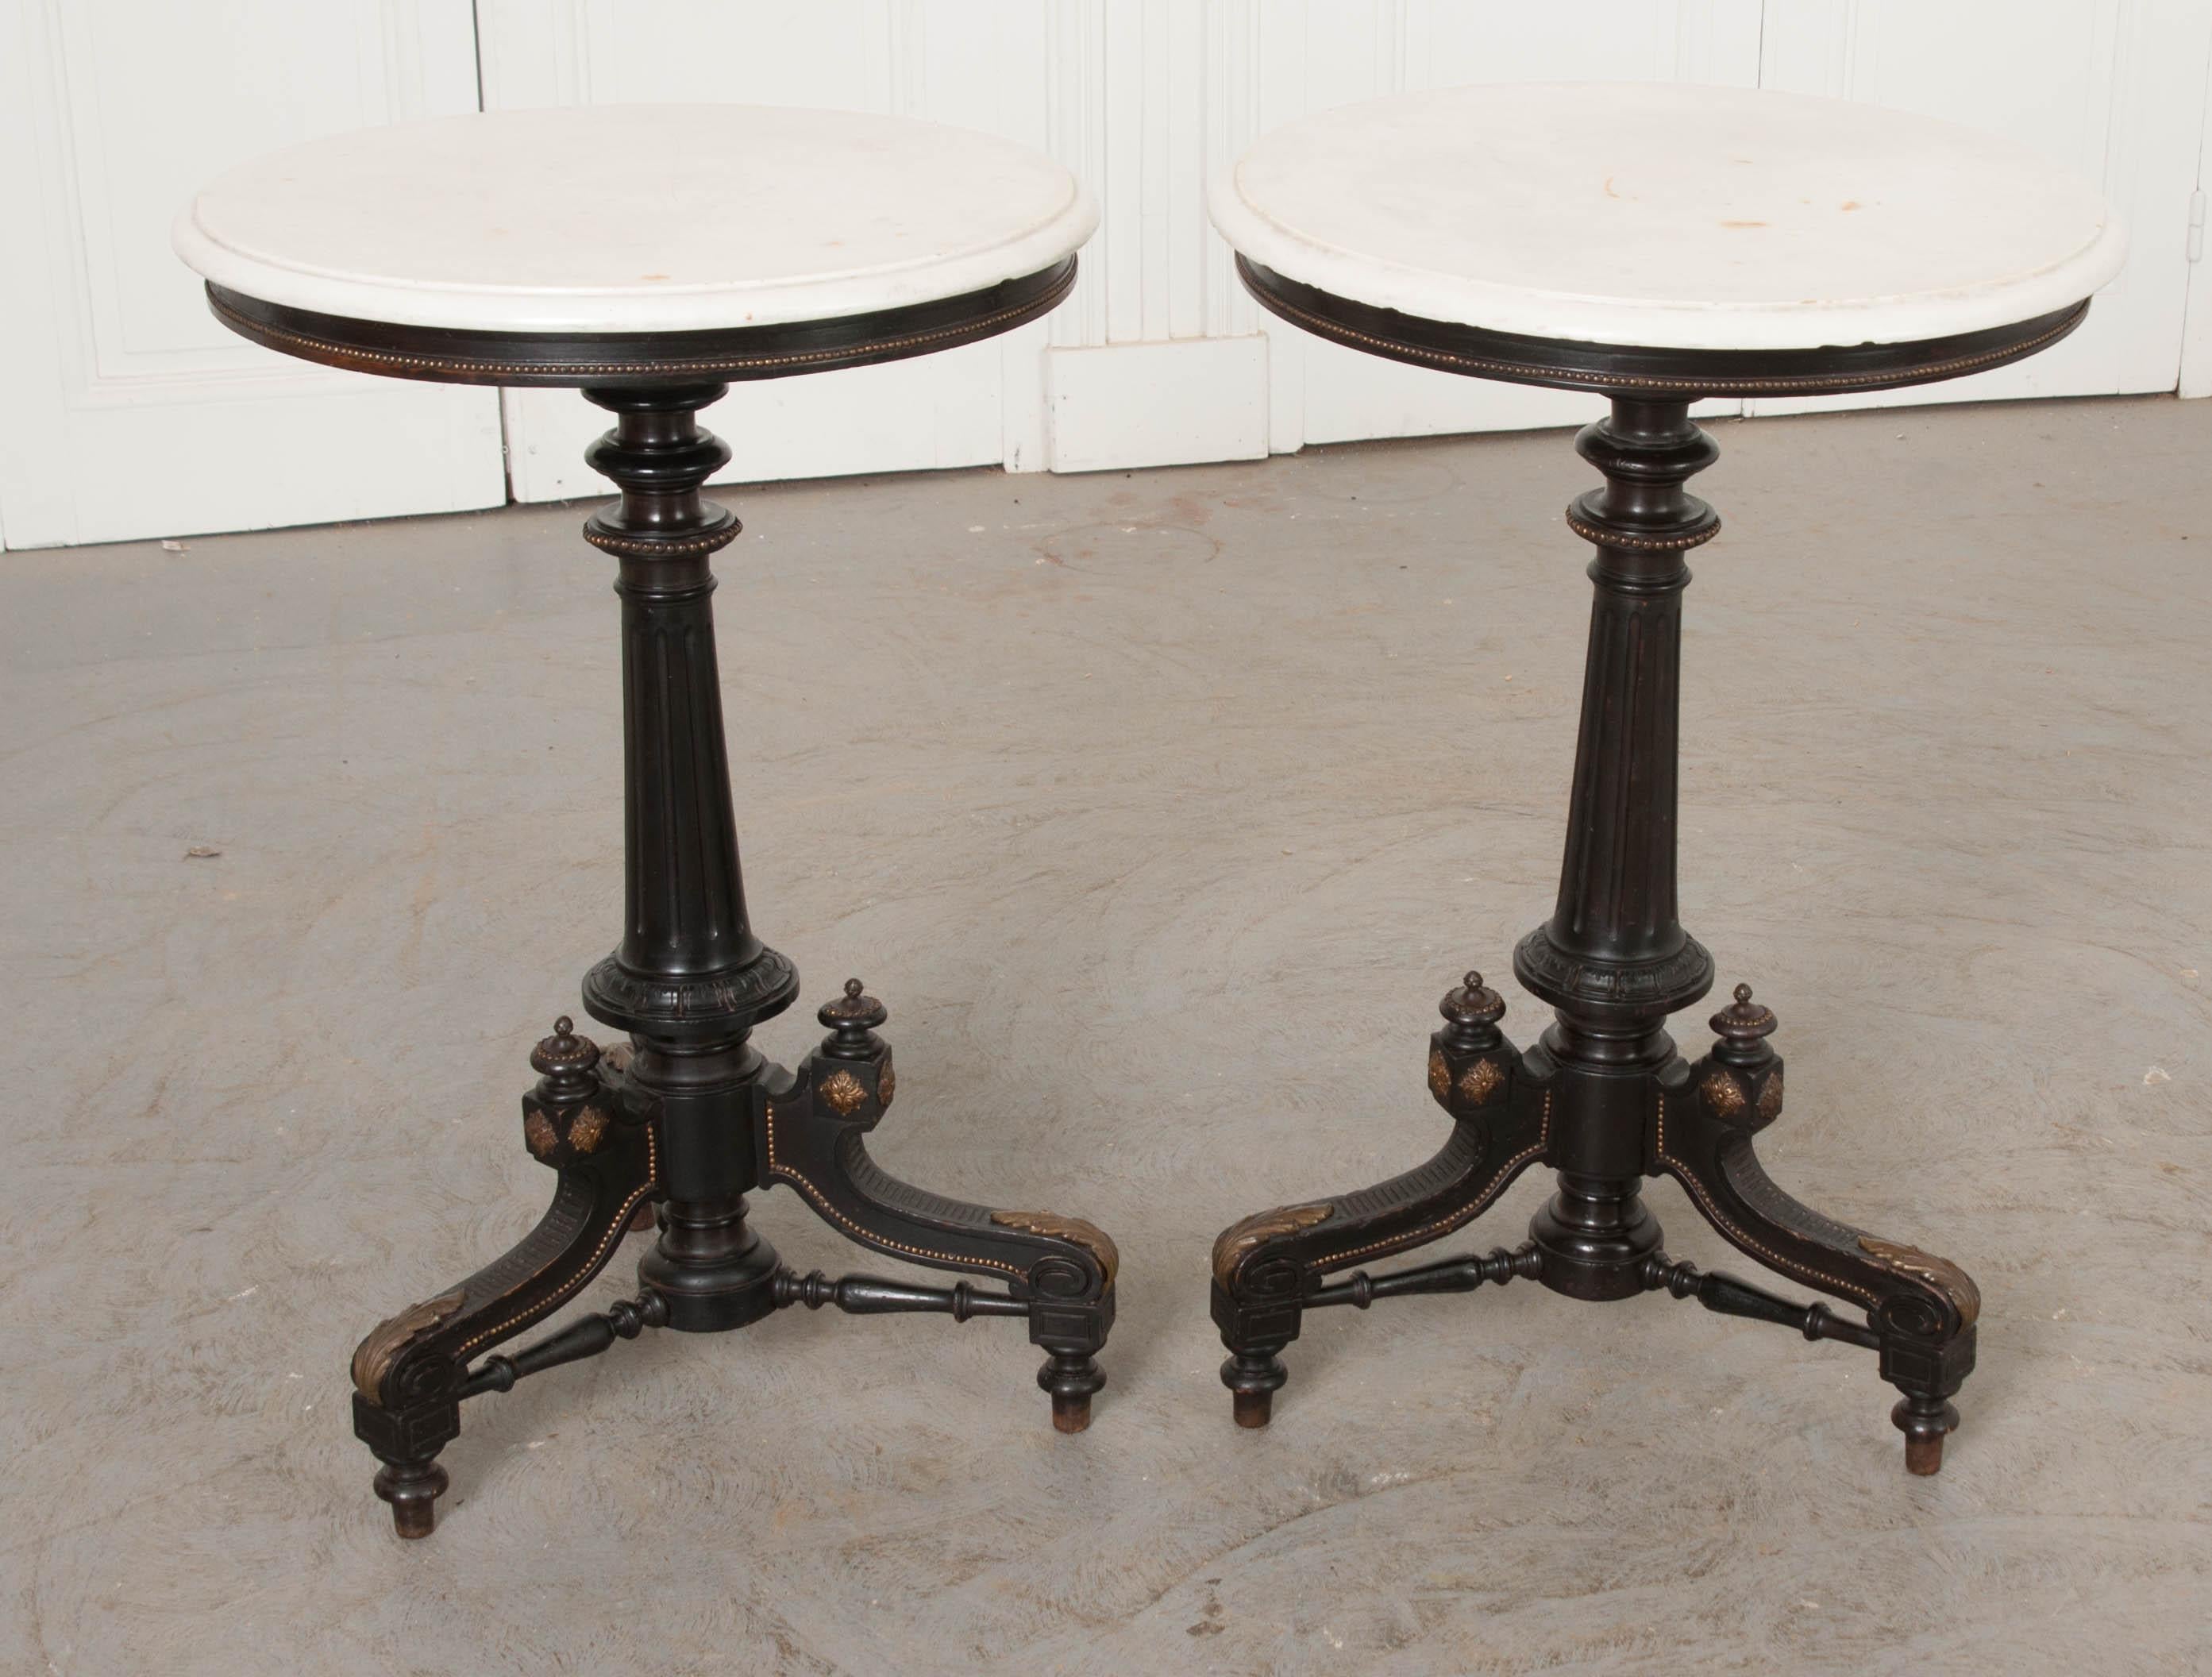 This stunning pair of ebonized marble-top tables, with impressive ormolu mountings throughout, are from Victorian England, circa 1870s. They feature carved white marble tops which screw into the beautifully turned and fluted standard above tripodal